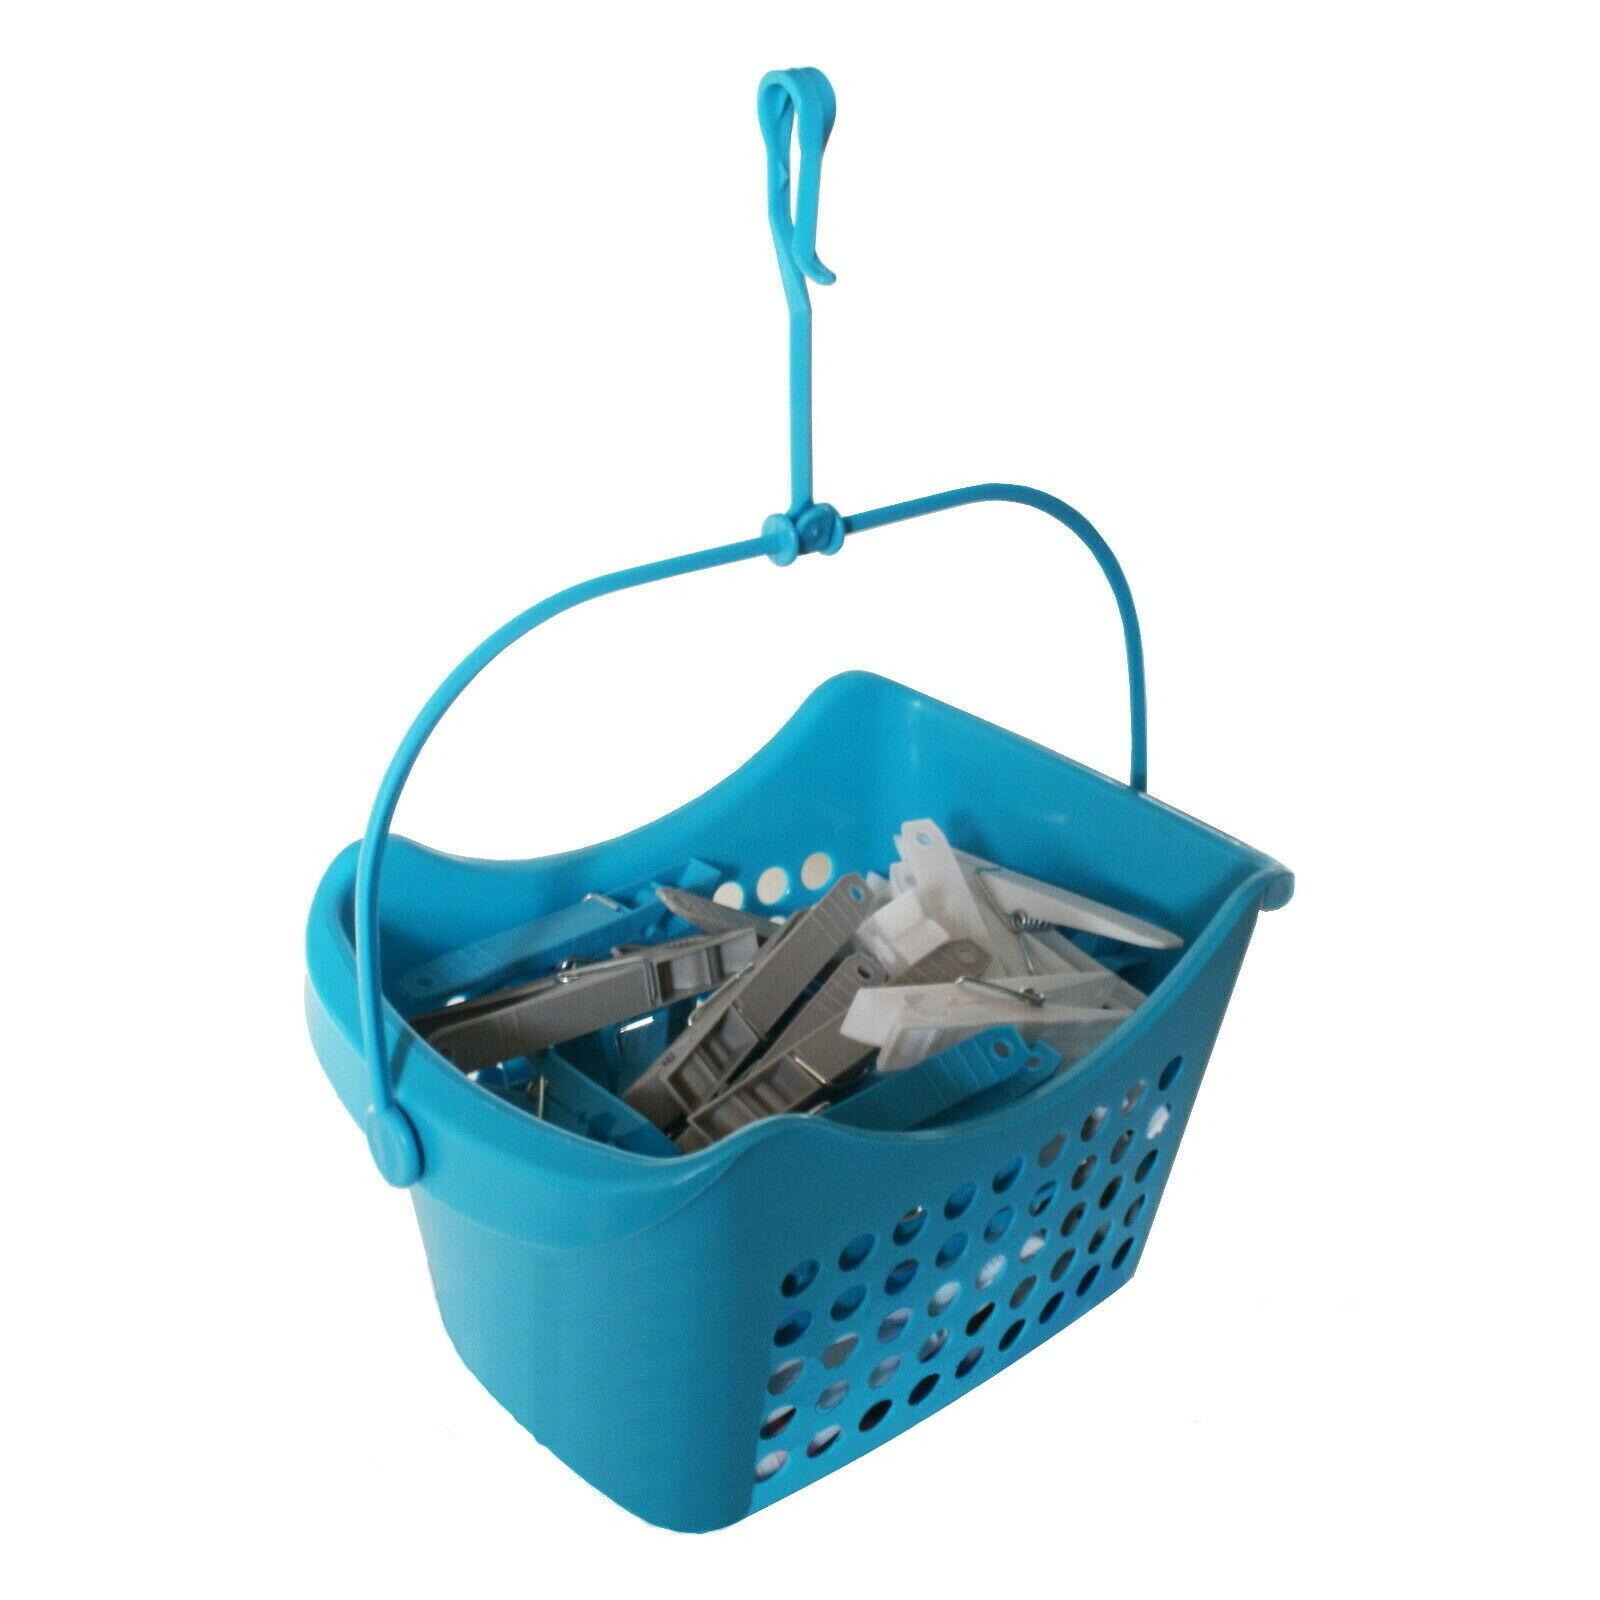 Details about   50 Large Plastic Clothes Pegs In Basket With Hanging Hook Washing Line Airer Peg 